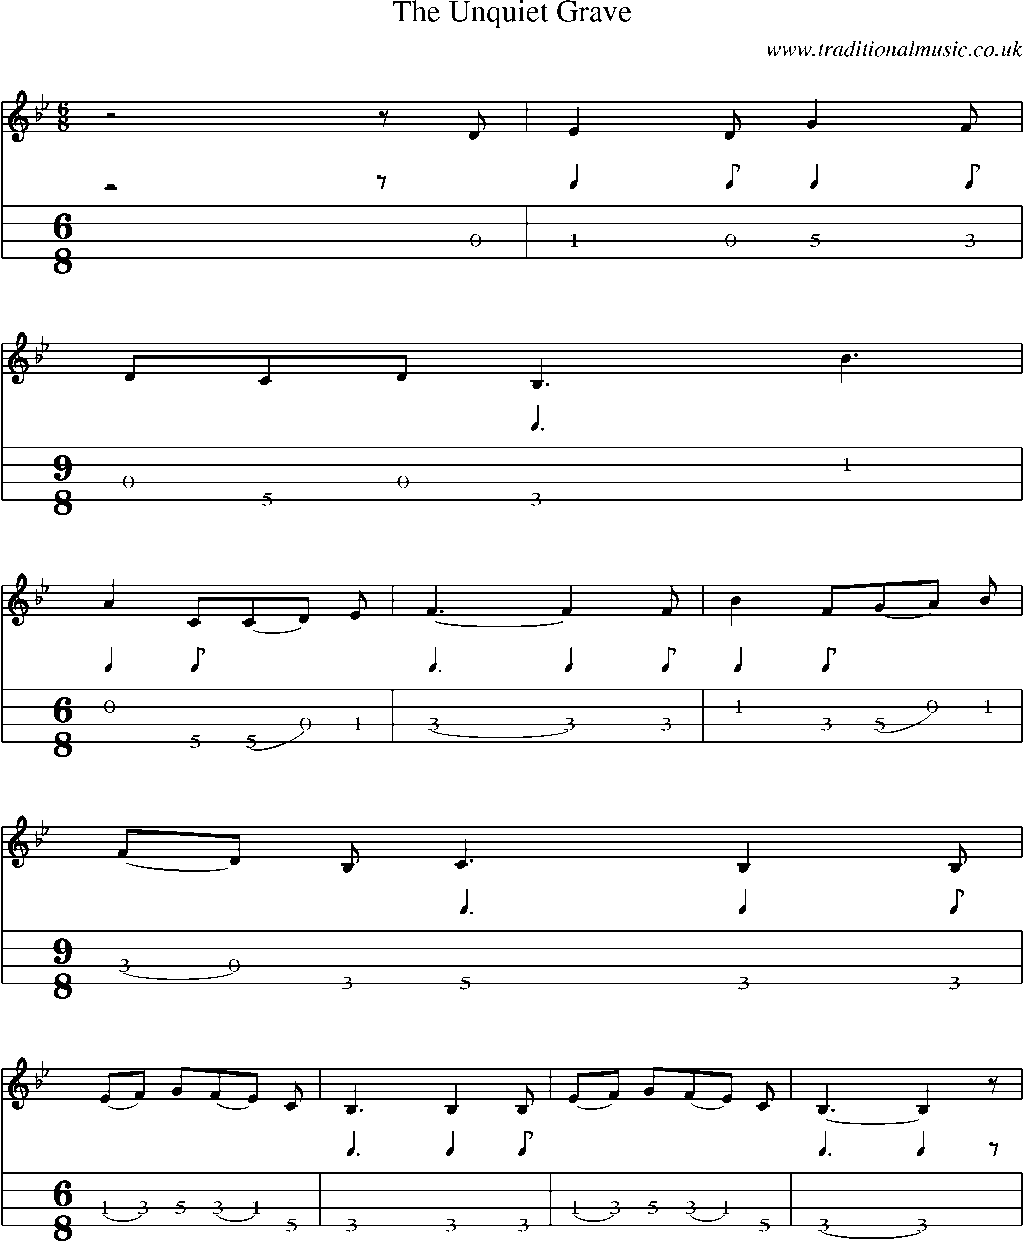 Mandolin Tab and Sheet Music for The Unquiet Grave